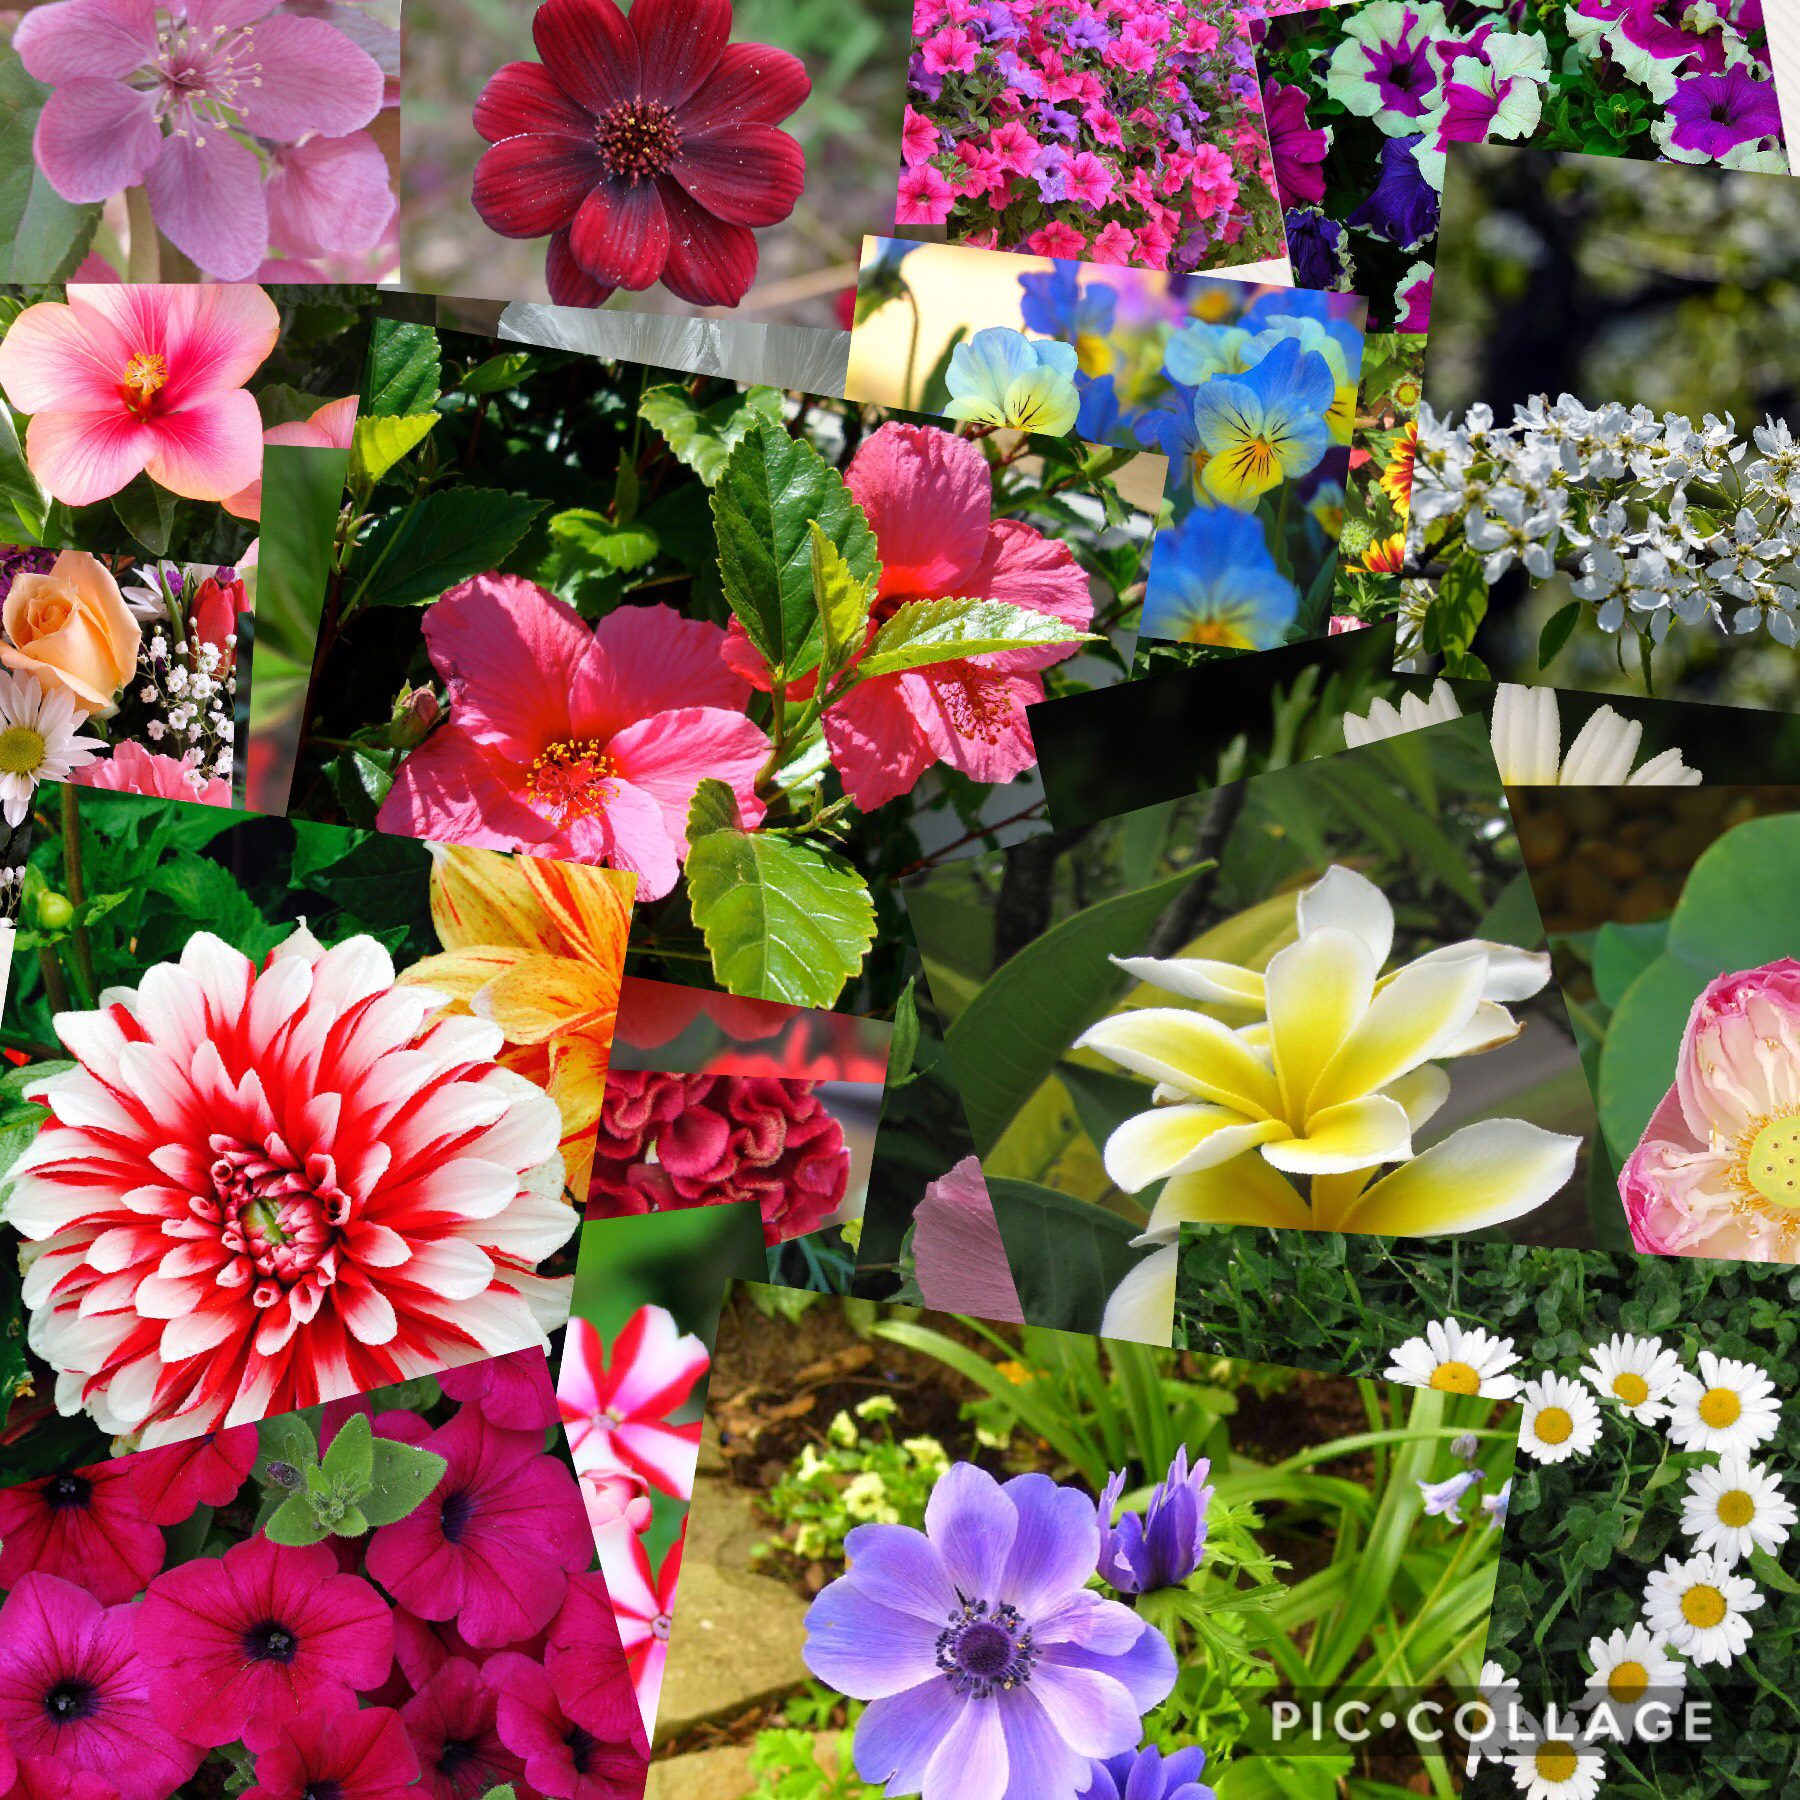 Flowers! What’s your favourite kind?